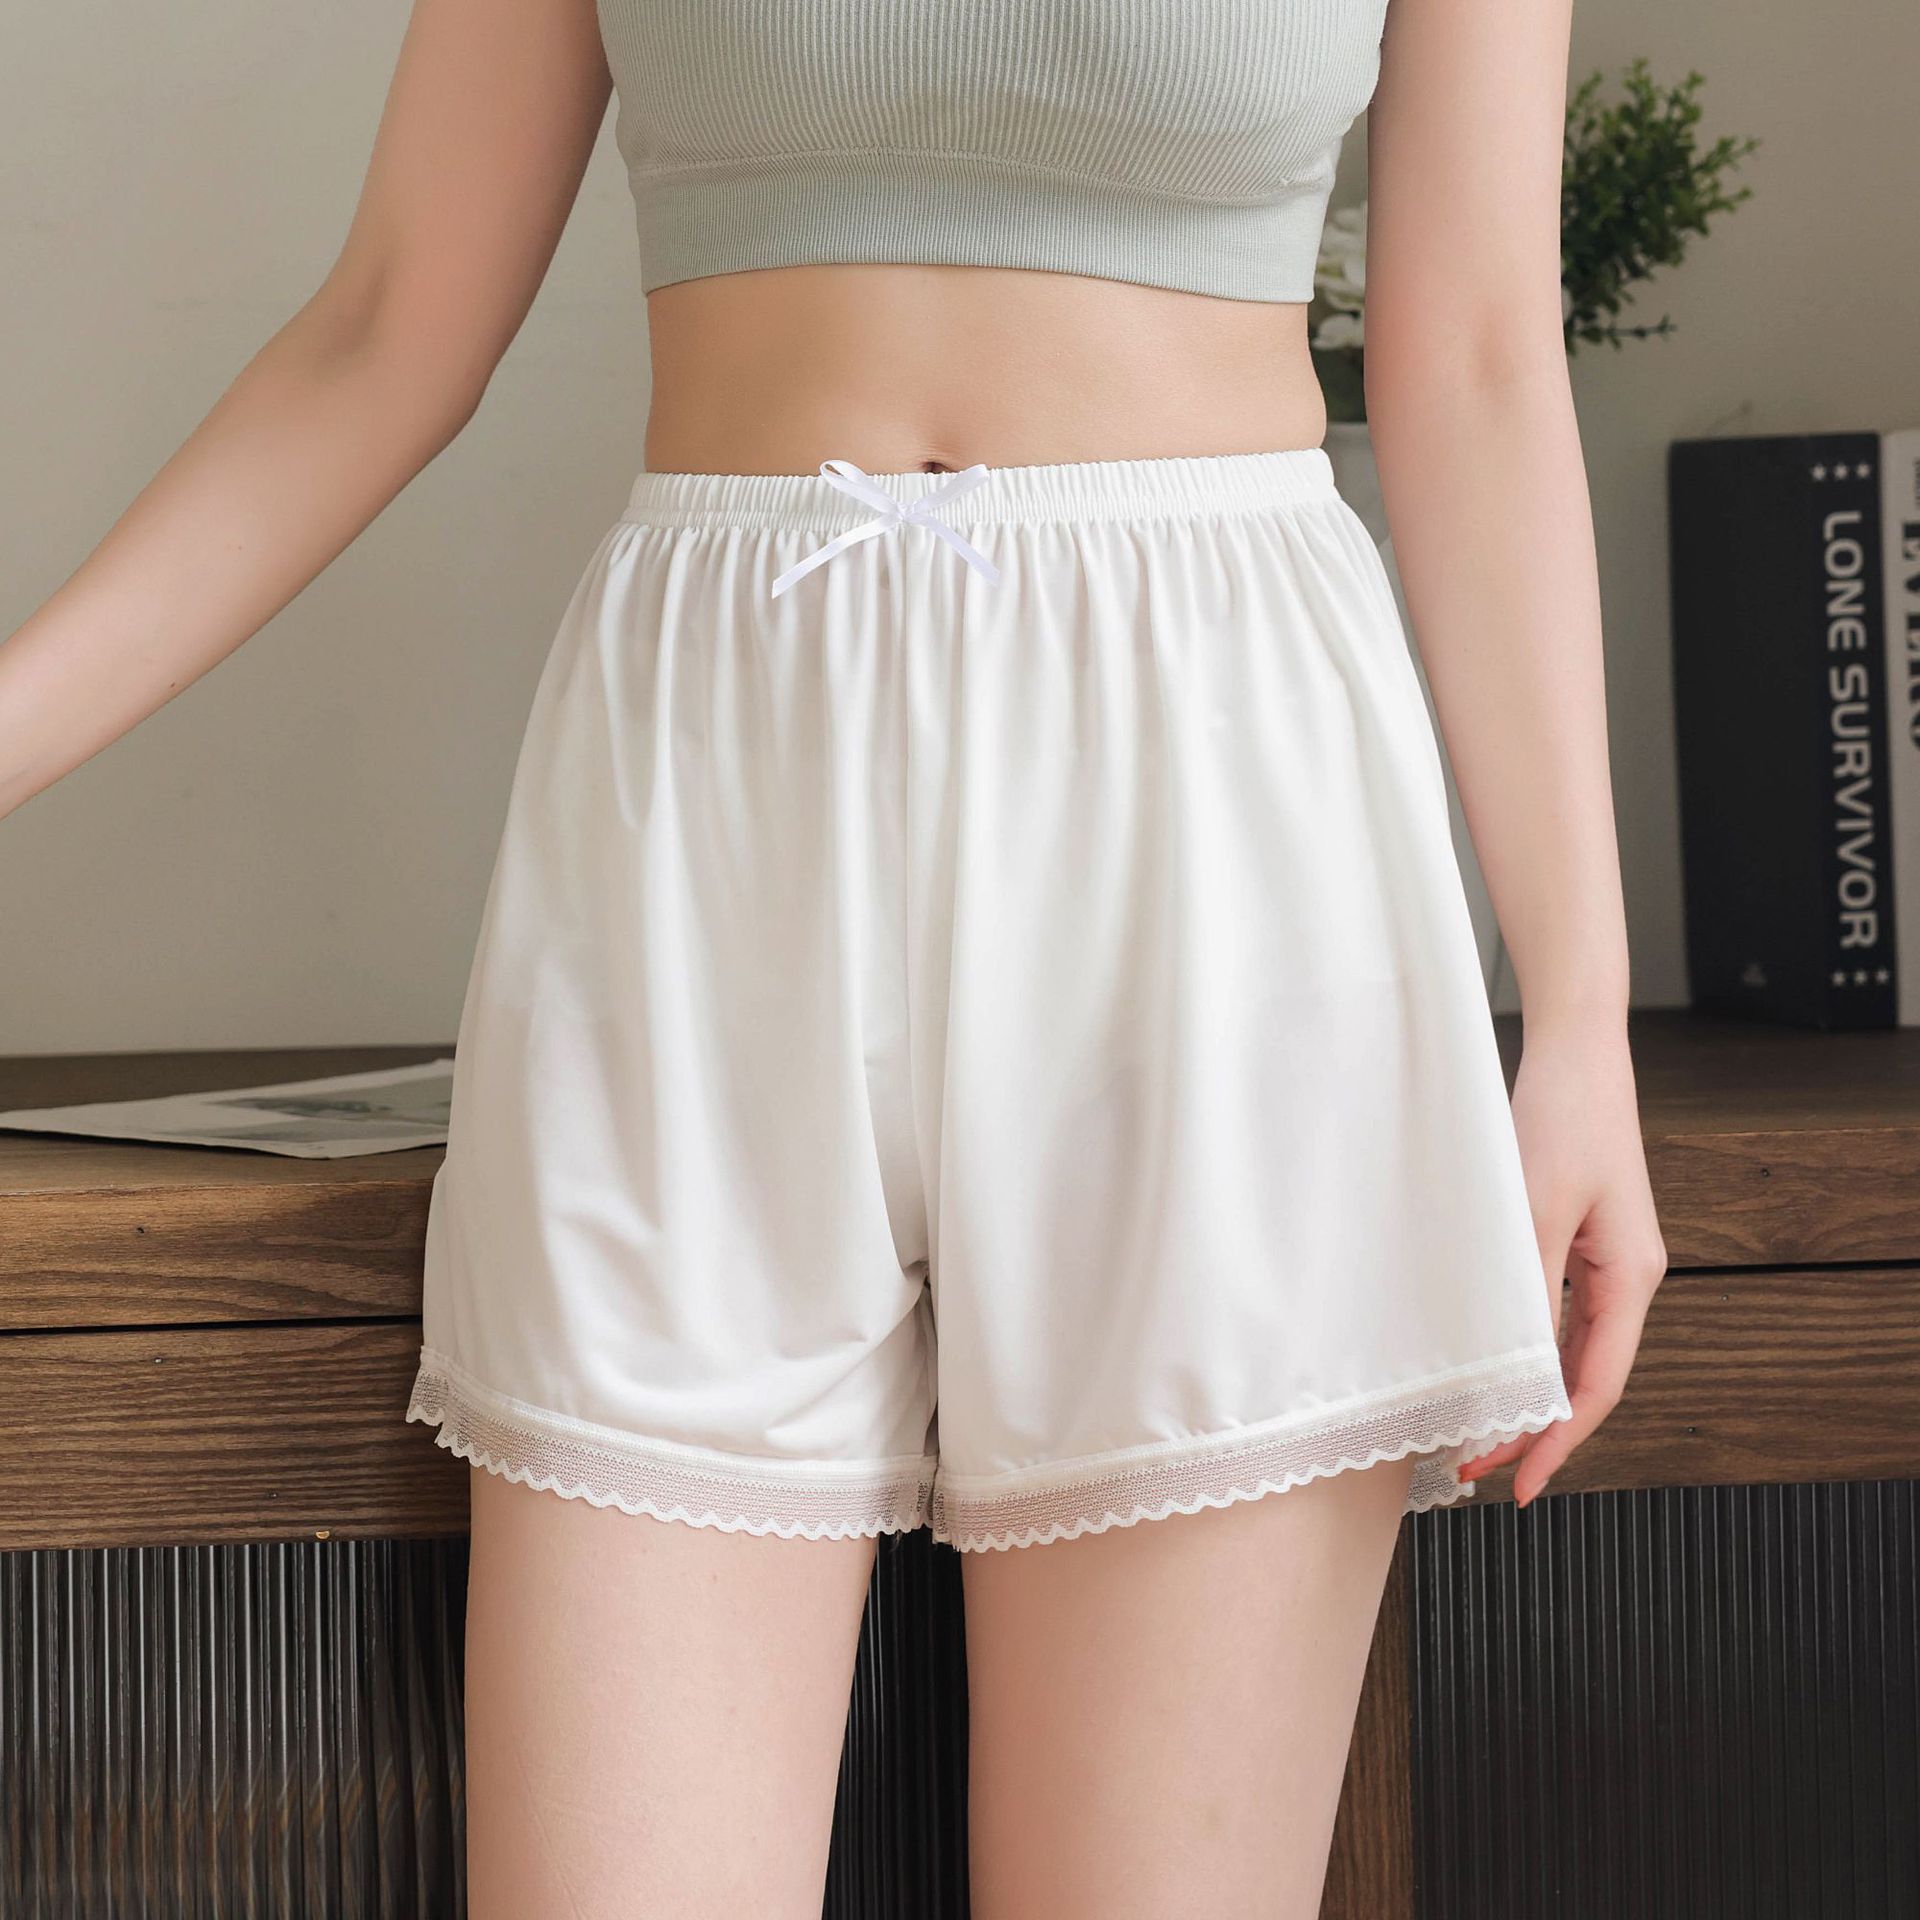 Lace White Safety Pants Women's Ice Silk Anti-Exposure Summer Thin Non-Curling Can Be Worn outside Shorts Safe Base Shorts